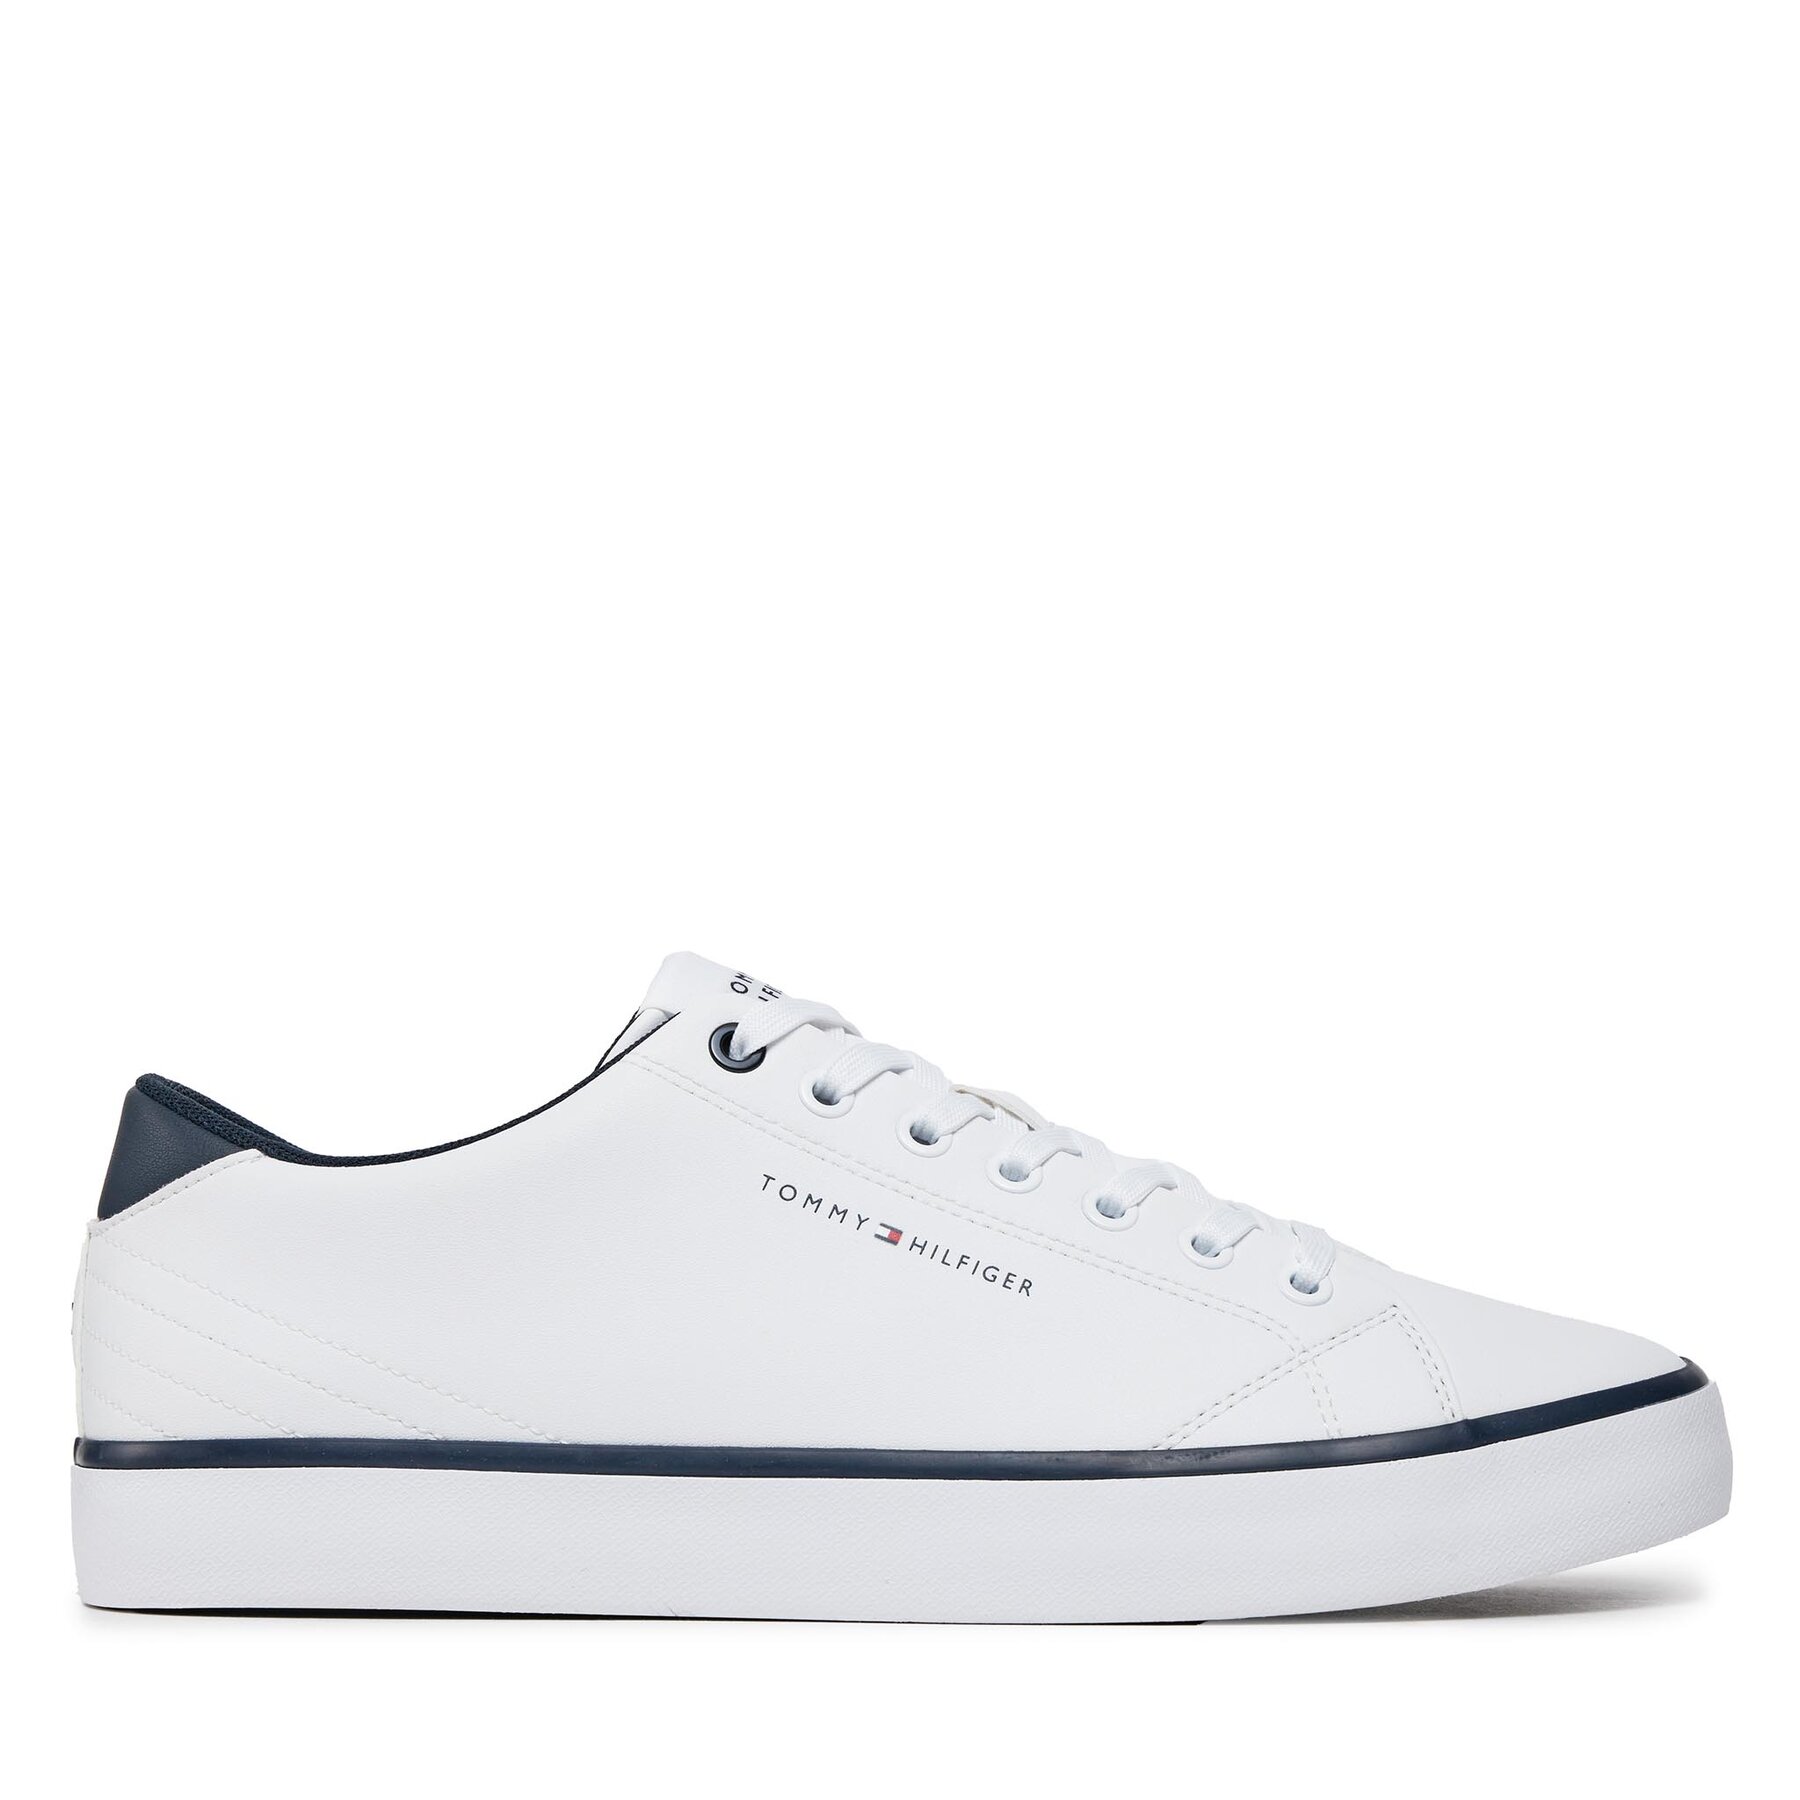 Sneakers Tommy Hilfiger Th Hi Vulc Core Low Leather FM0FM05041 White YBS von Tommy Hilfiger